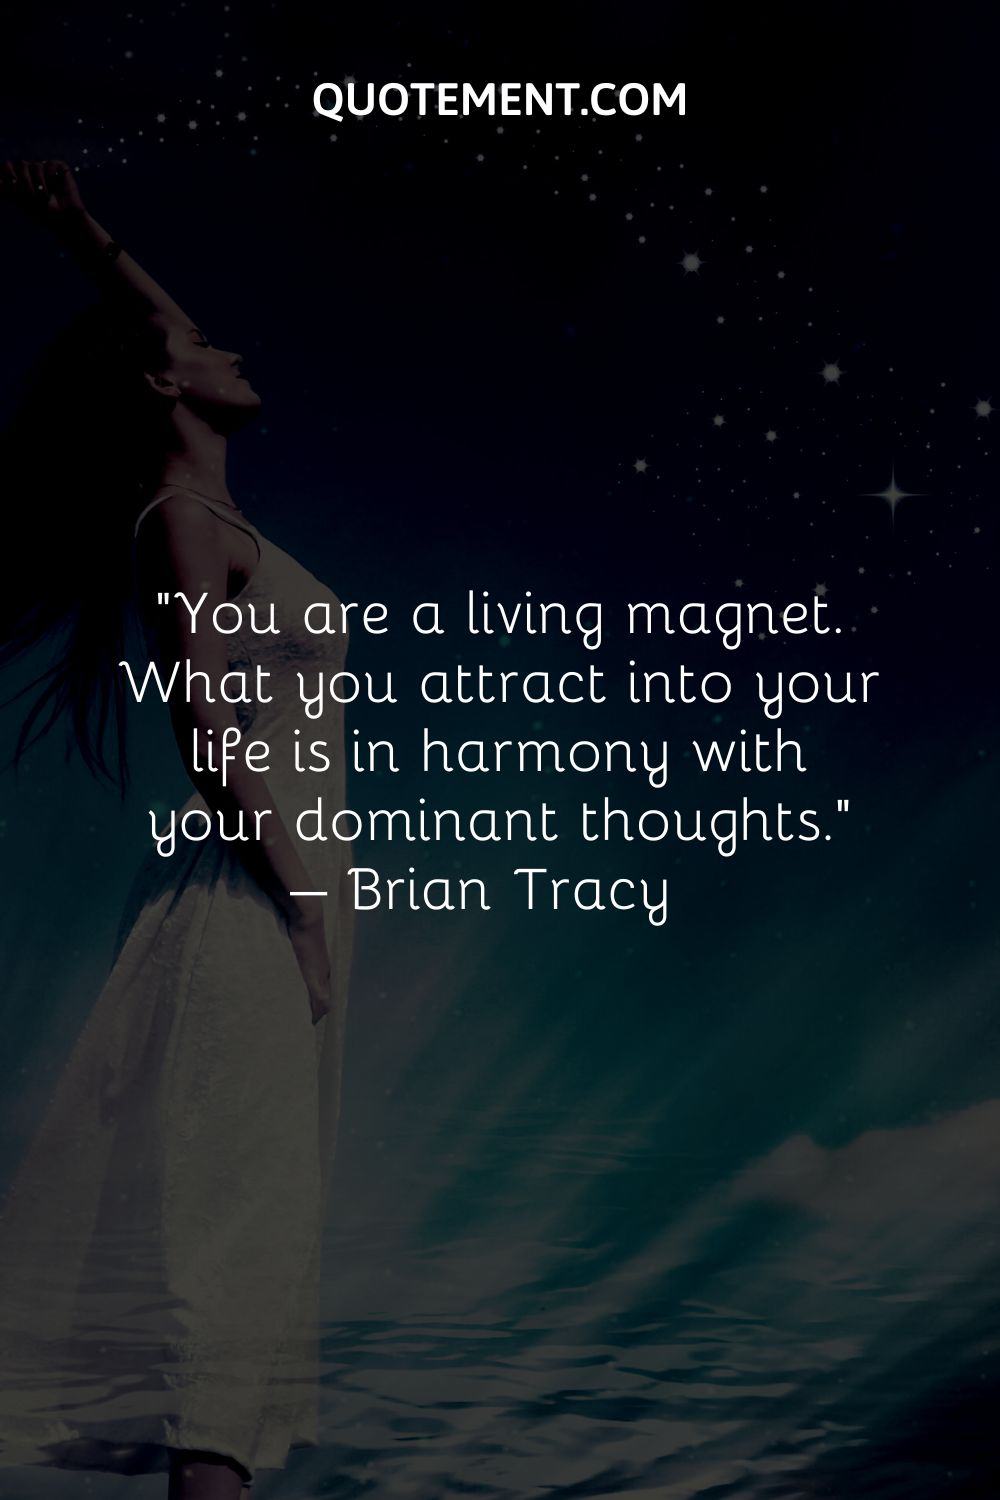 You are a living magnet. What you attract into your life is in harmony with your dominant thoughts